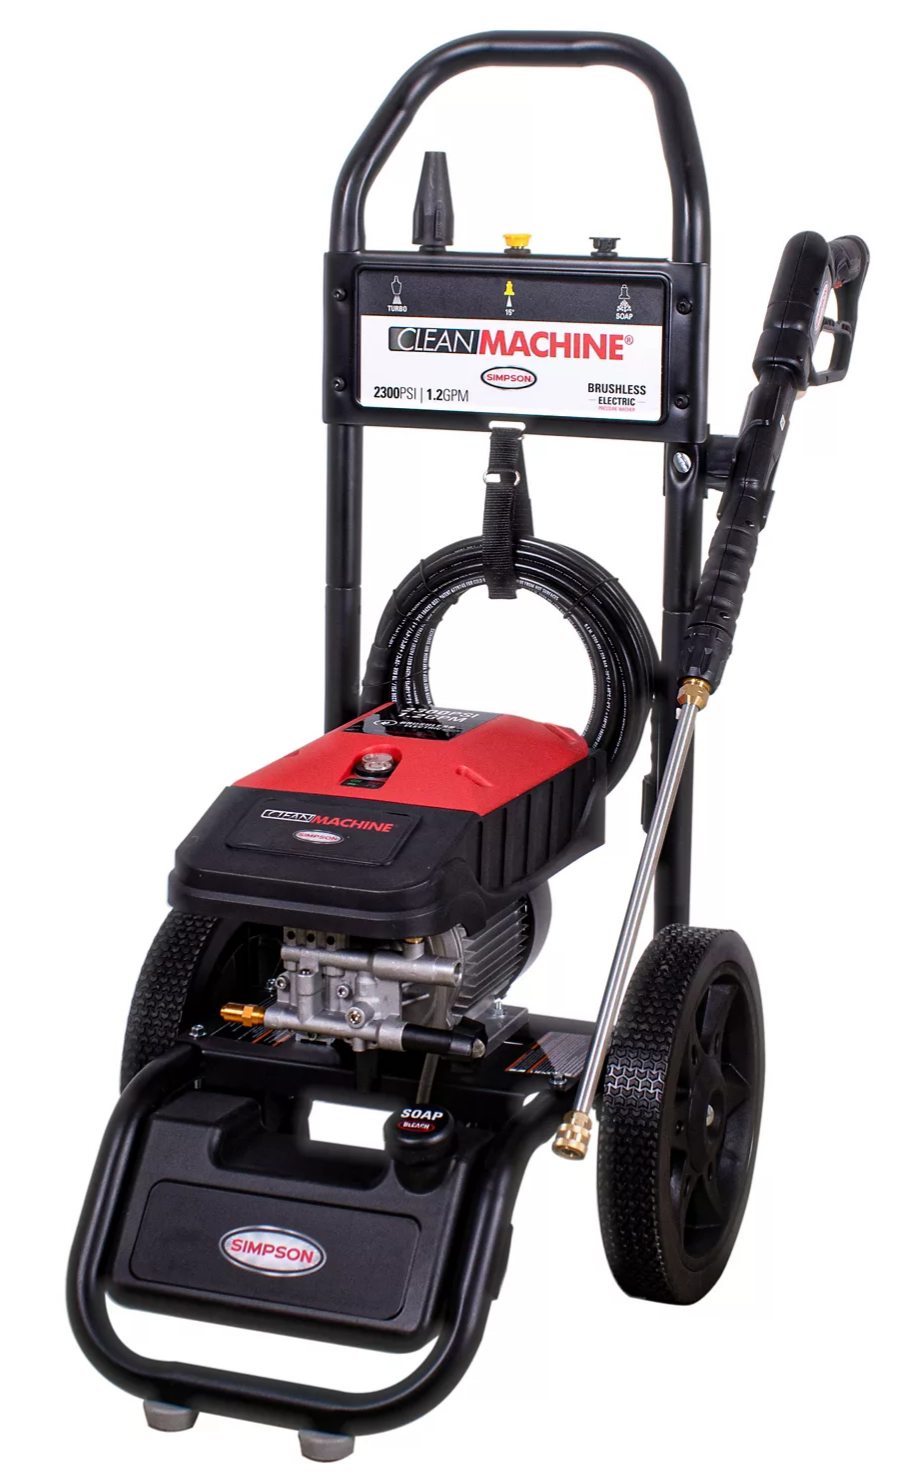 Clearance YMMV - Simpson 2,300 PSI 1.2 GPM Electric Cold Water Clean Machine Residential Pressure Washer - Made in USA - $119.99